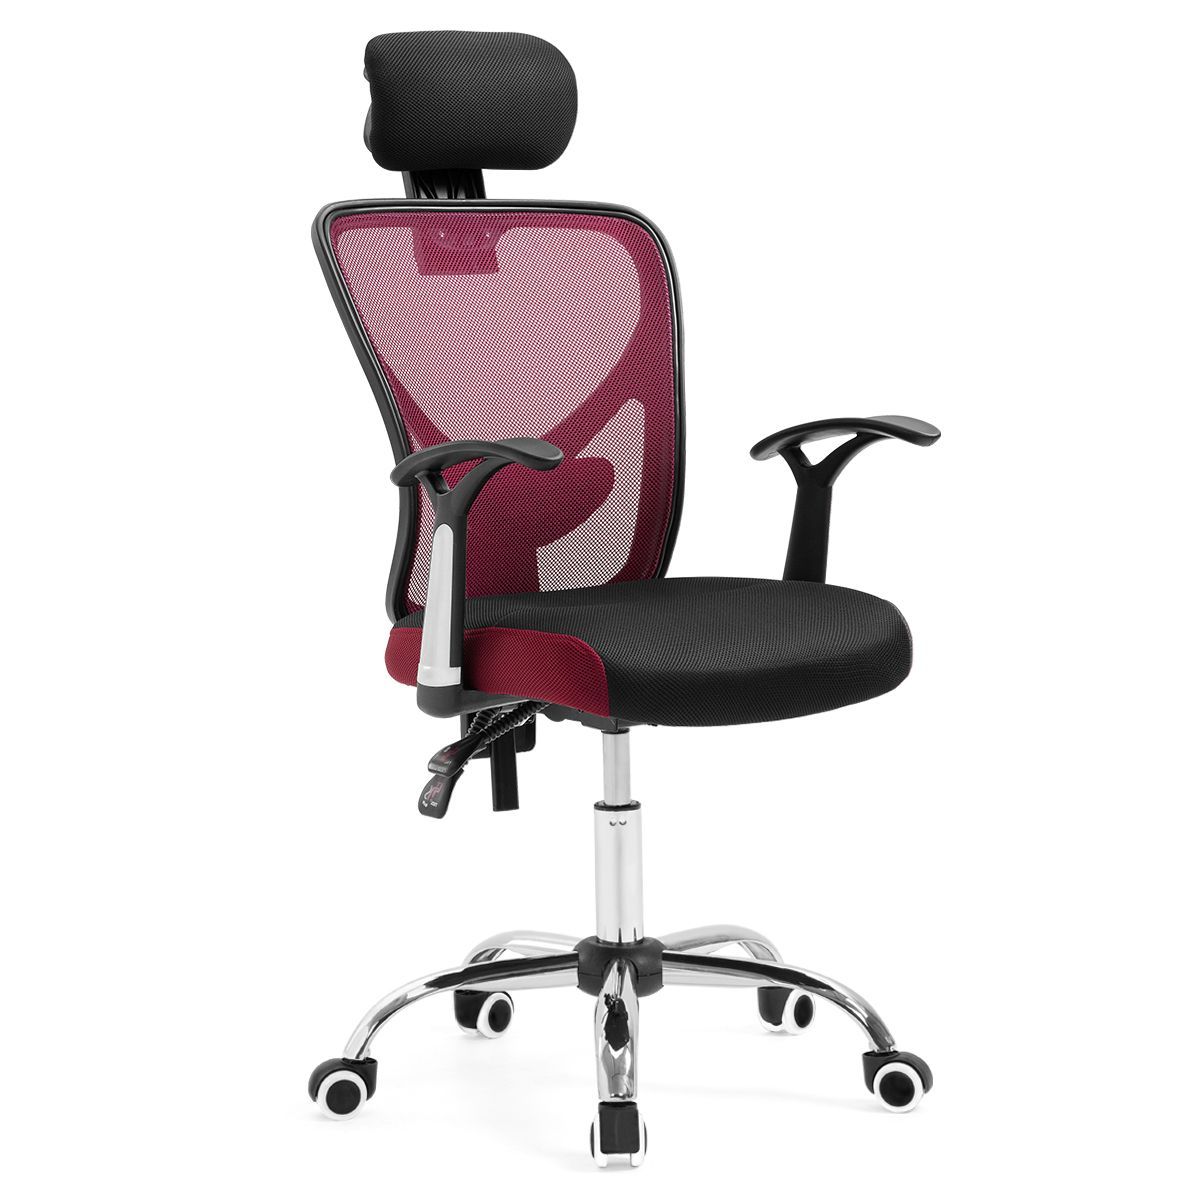 Adjustable Breathable Ergo Mesh Office Computer Chair w/ Lumbar Support